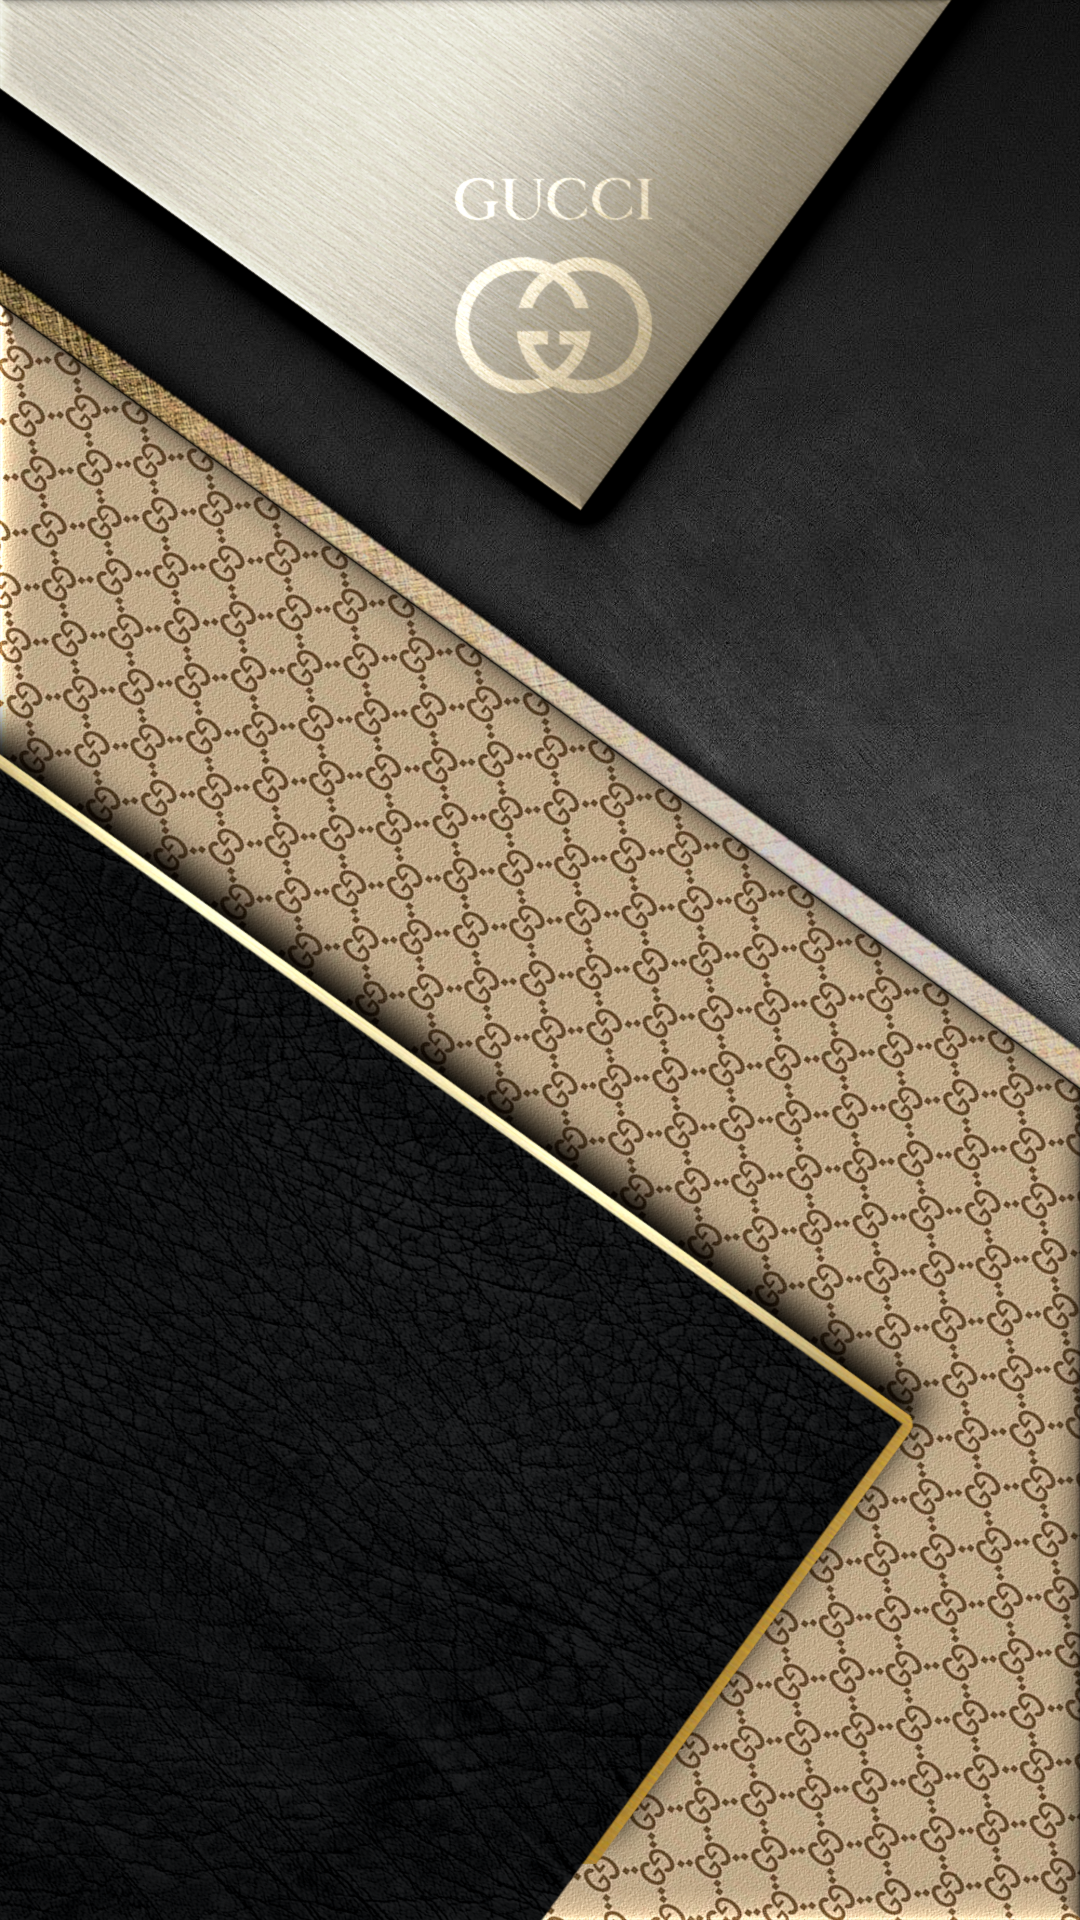 Gucci Print Layered iPhone Wallpaper by